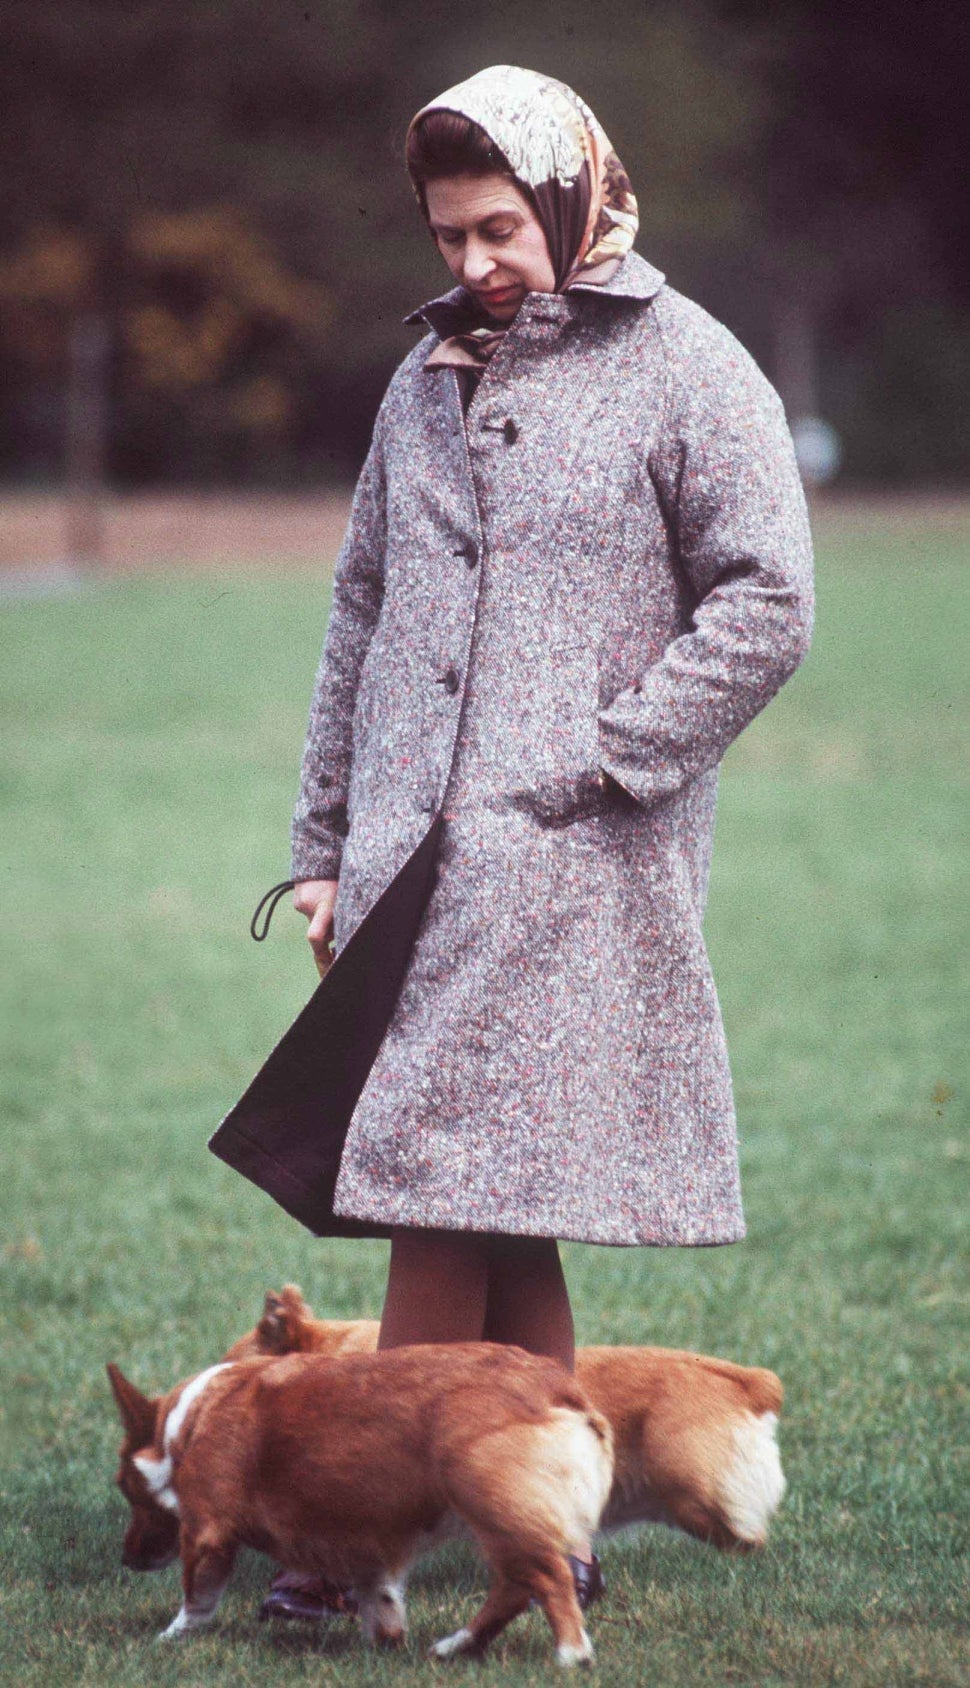 Queen Elizabeth II With Two Of Her Corgis In The Grounds Of Windsor Castle